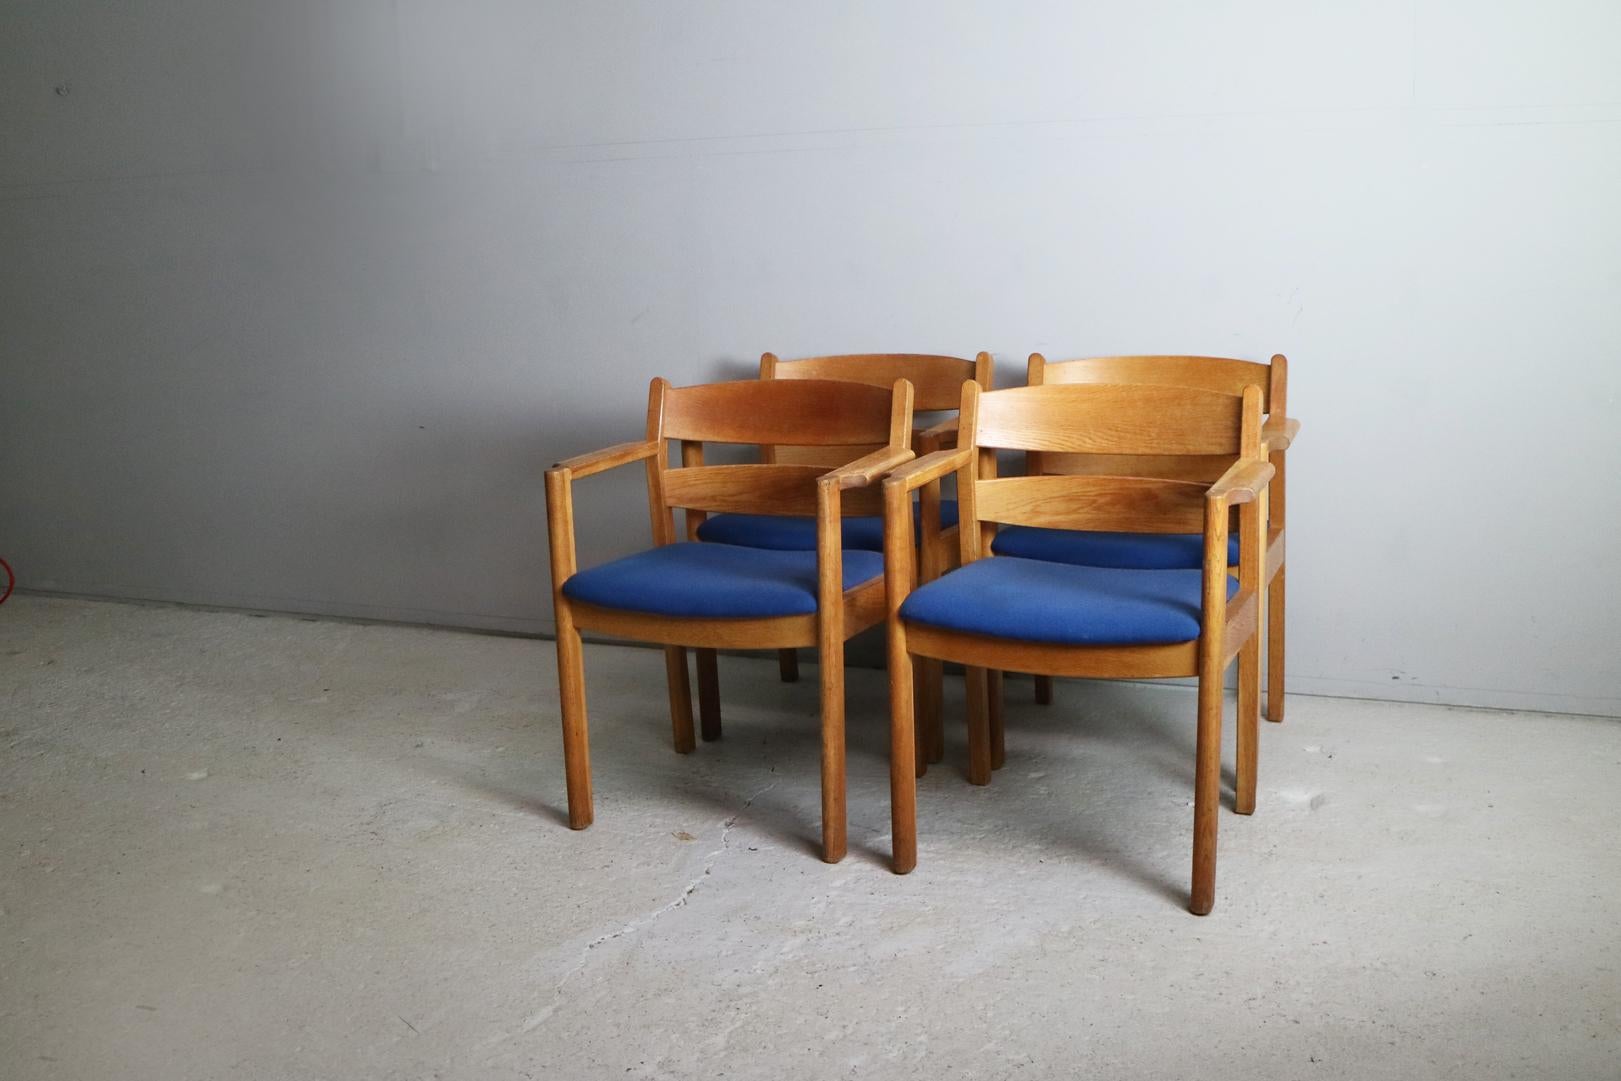 FDB Mobler was established in 1942. Designer Børge Mogensen was head of the studio. Designers have included Jørgen Baekmark, Ejvind A. Johansson and Poul M. Volther

They continue to make new furniture today as well as re-issuing design